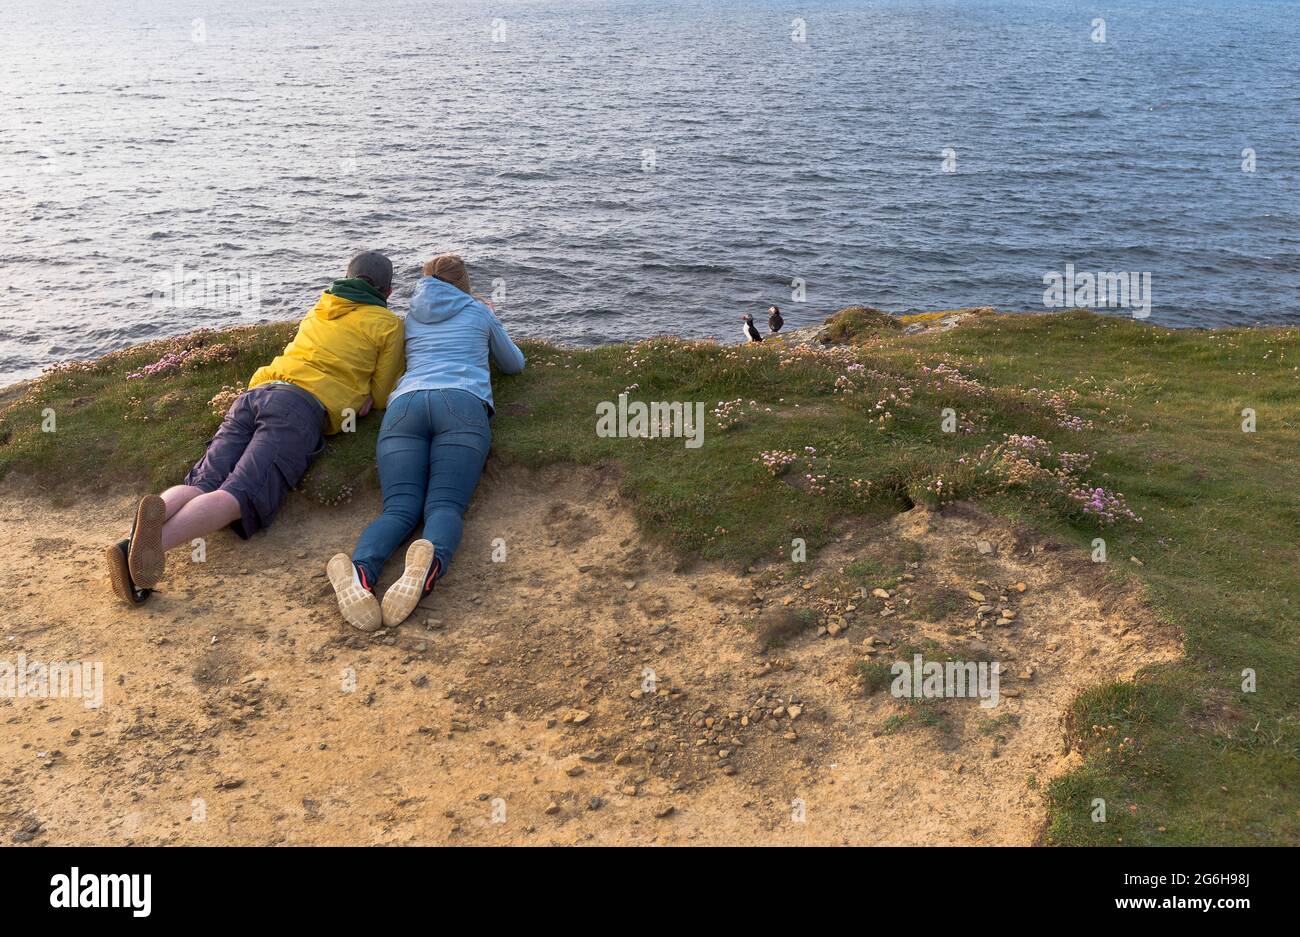 dh Puffins BIRSAY ORKNEY Couple tourist people watching Puffin birds scotland fratercula arctica Stock Photo